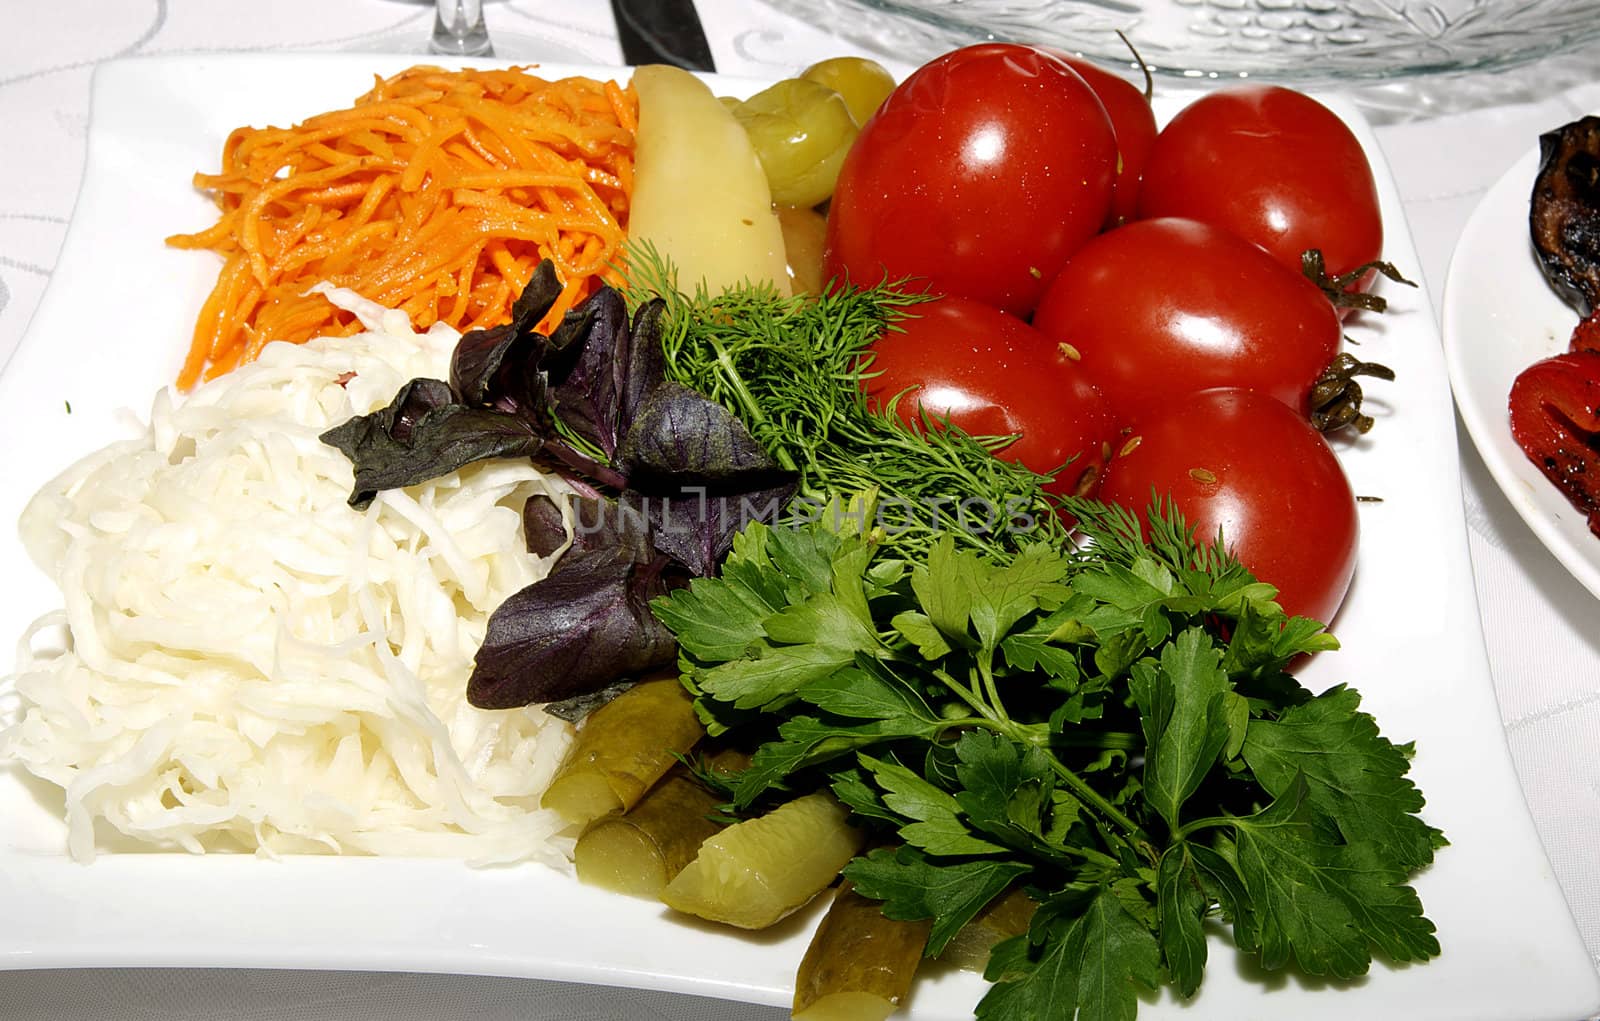 pickled vegetables on the plate on a white background